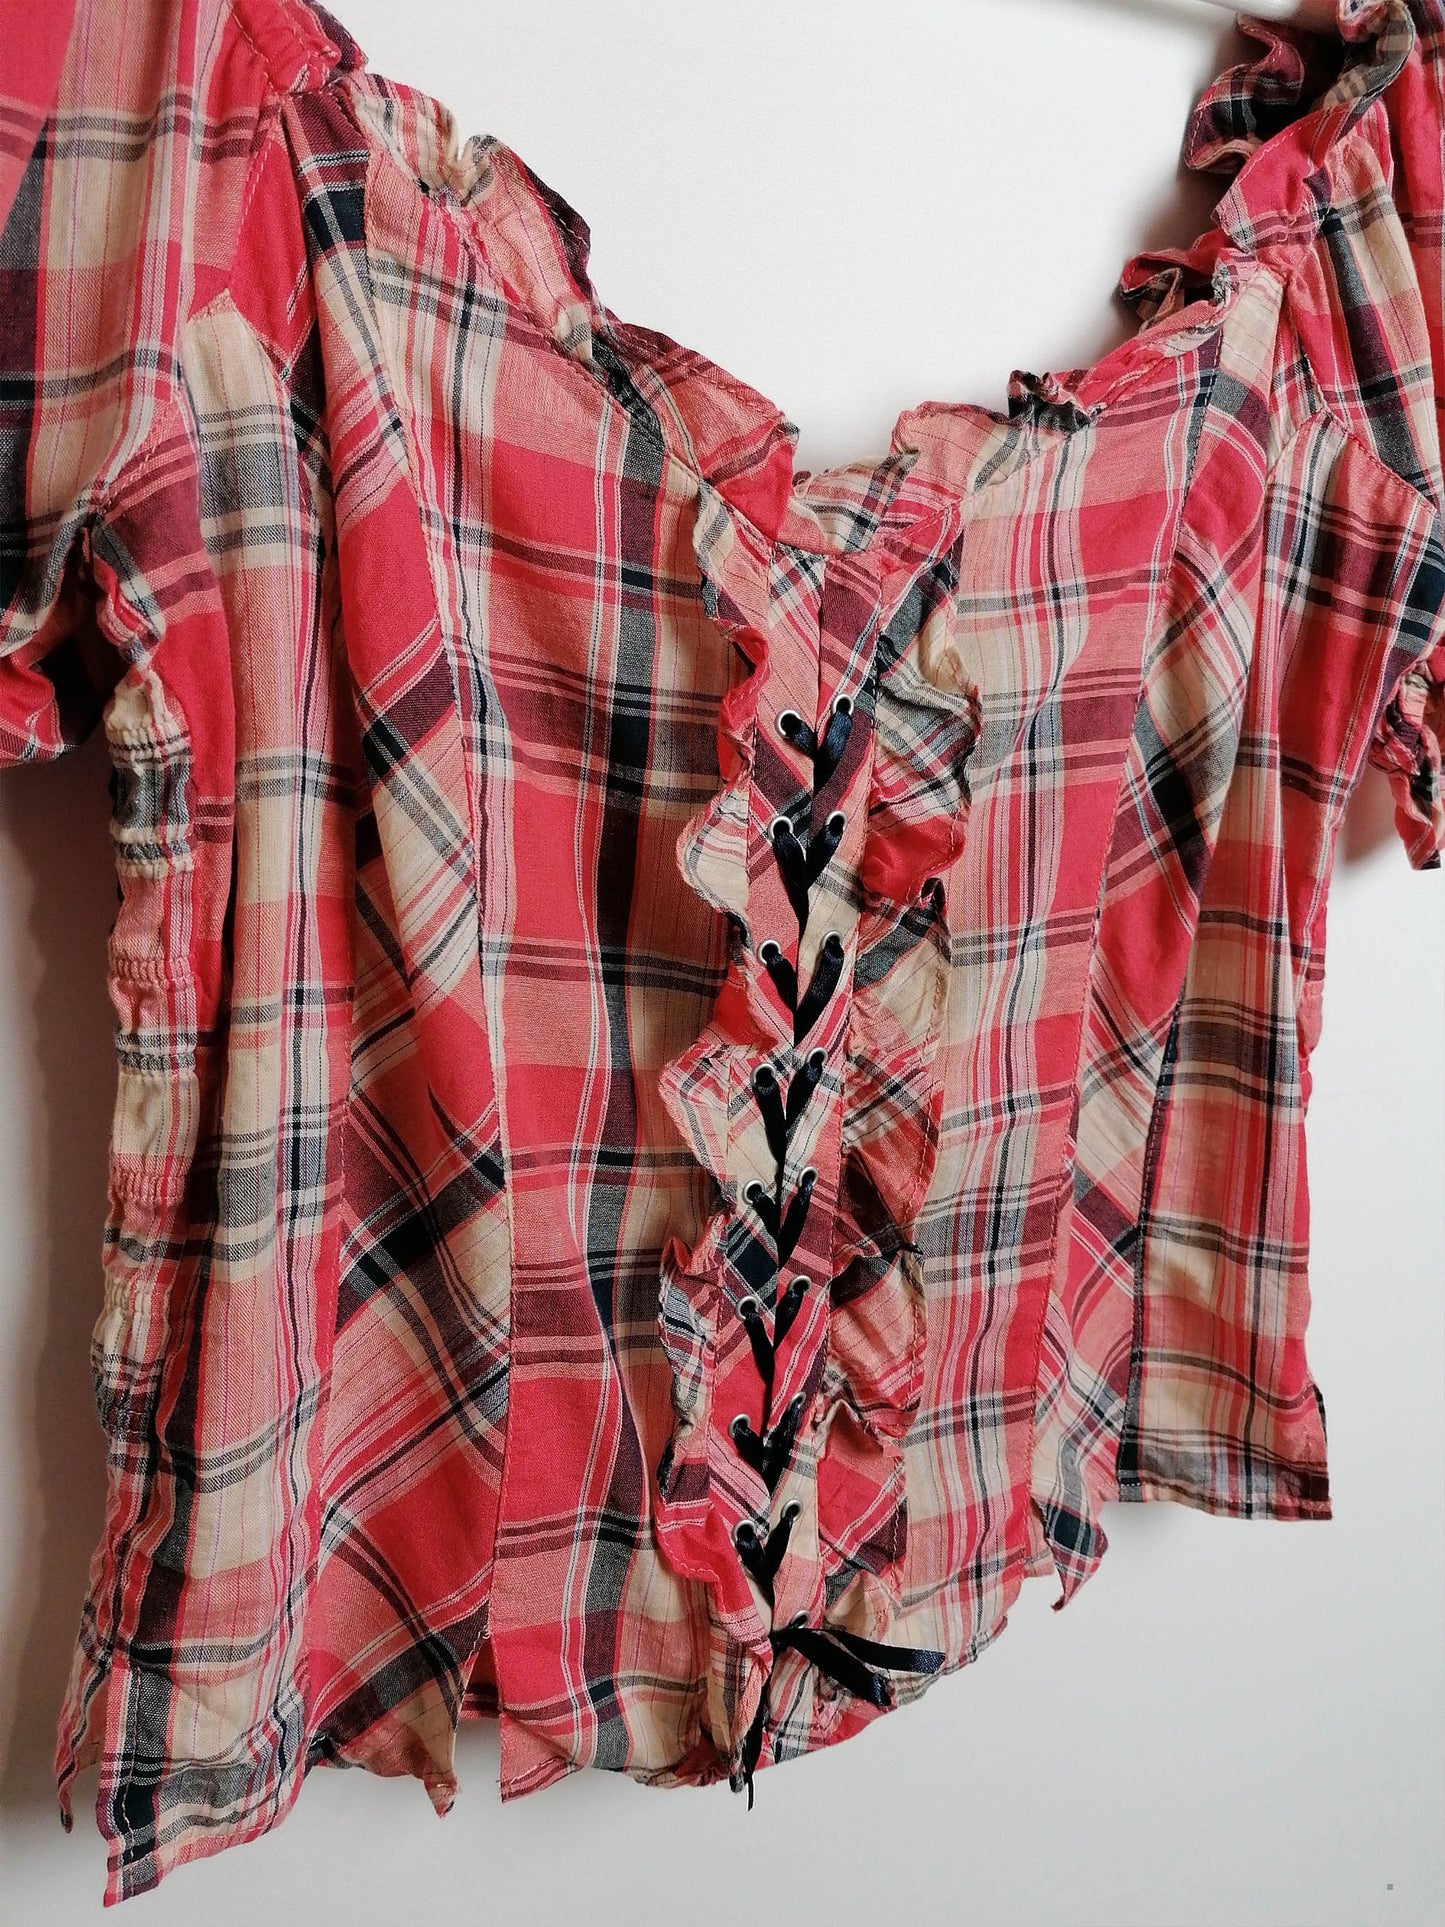 Peasant Style Puffy Blouse Plaid Check Pattern - size L